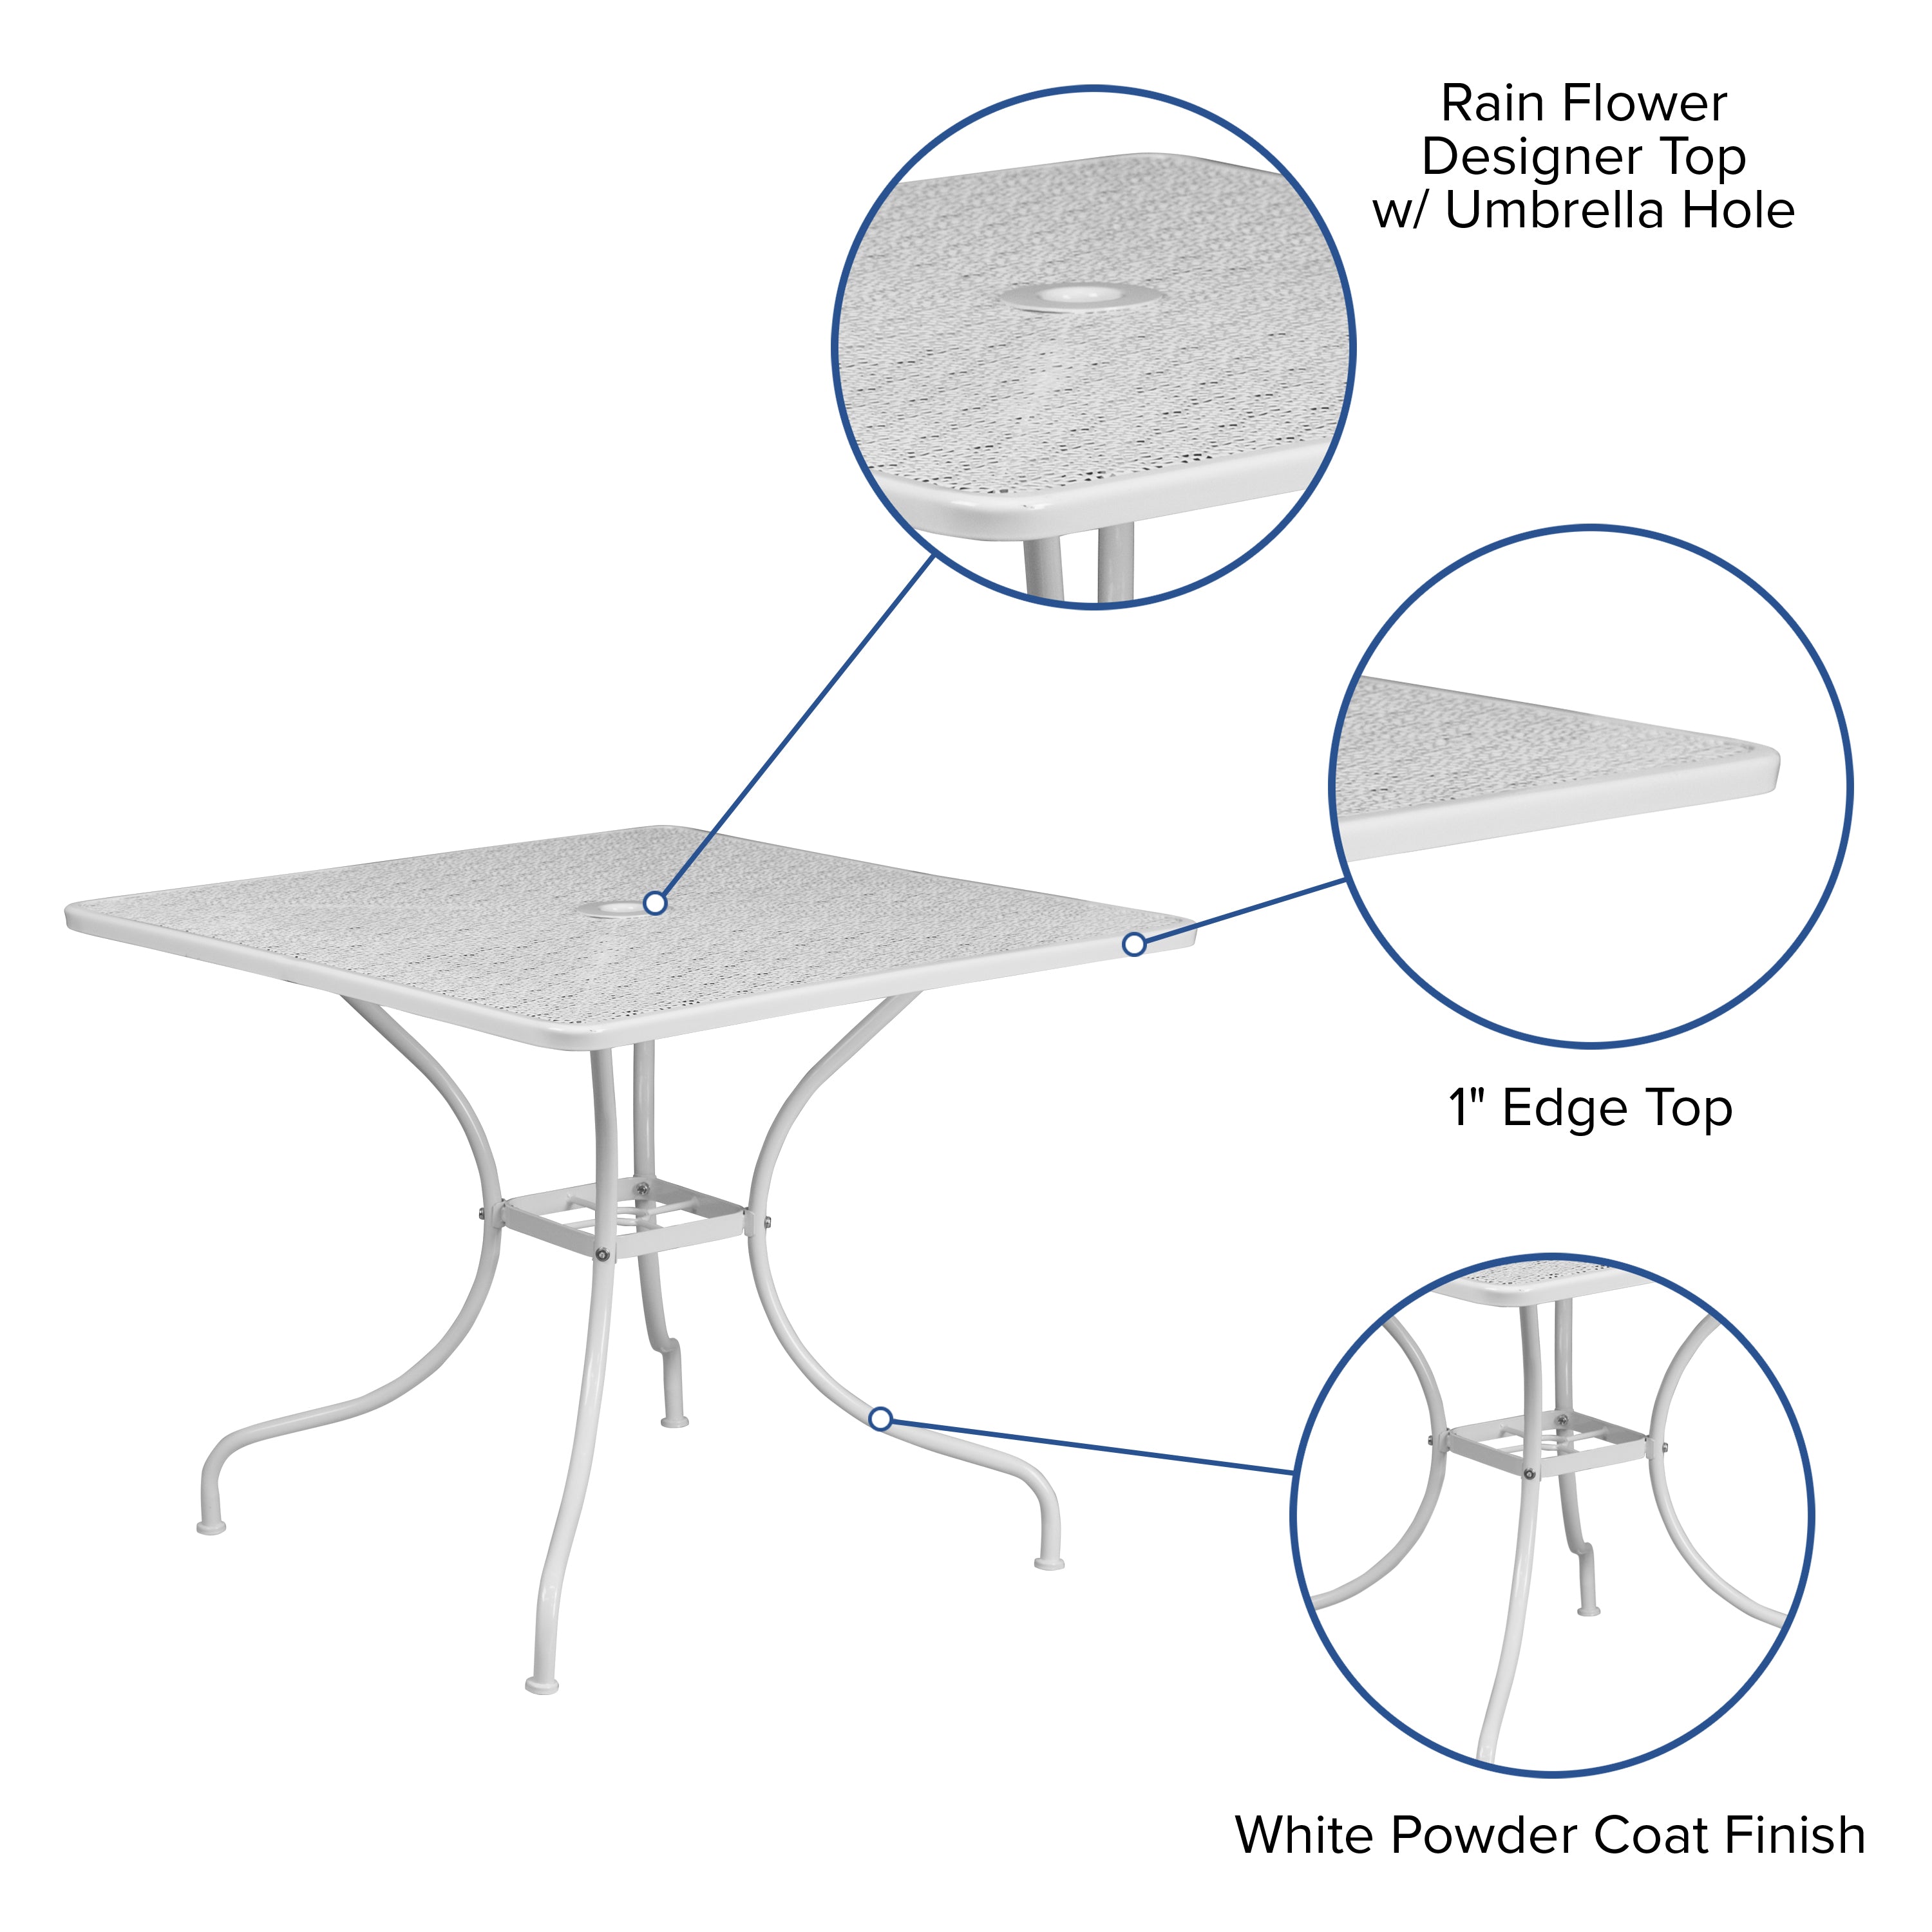 Oia Commercial Grade 35.5" Square Indoor-Outdoor Steel Patio Table with Umbrella Hole-Indoor/Outdoor Tables-Flash Furniture-Wall2Wall Furnishings